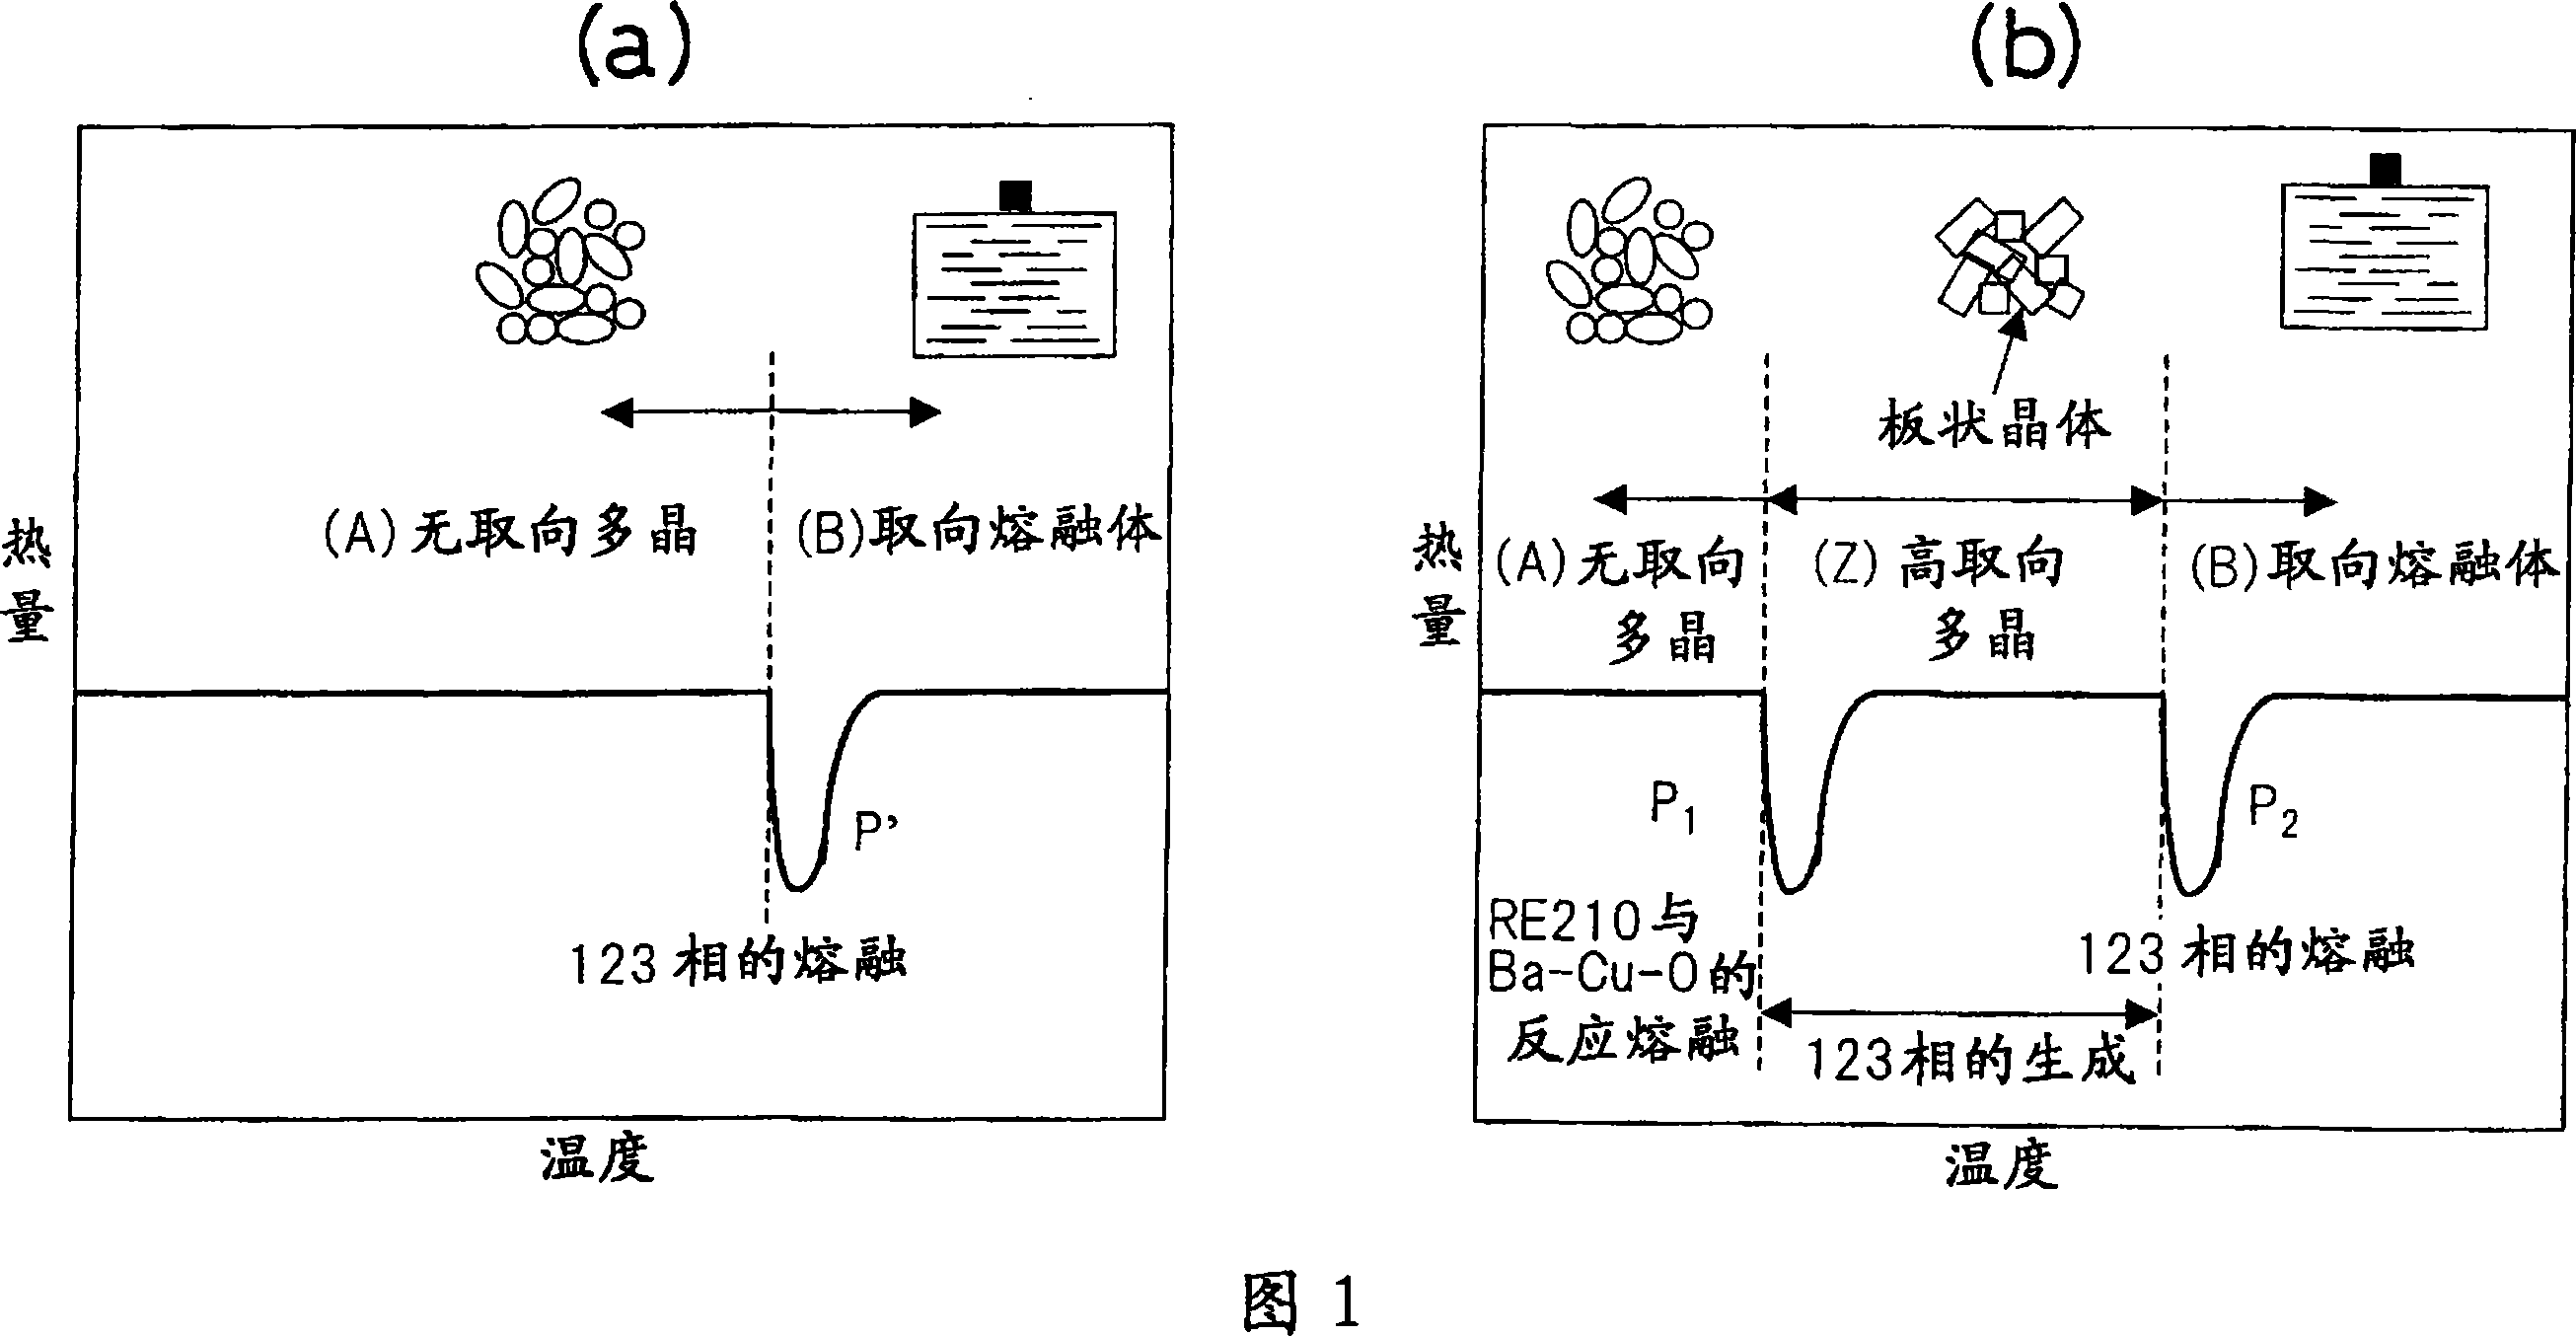 Re123 oxide superconductor and method for manufacturing same